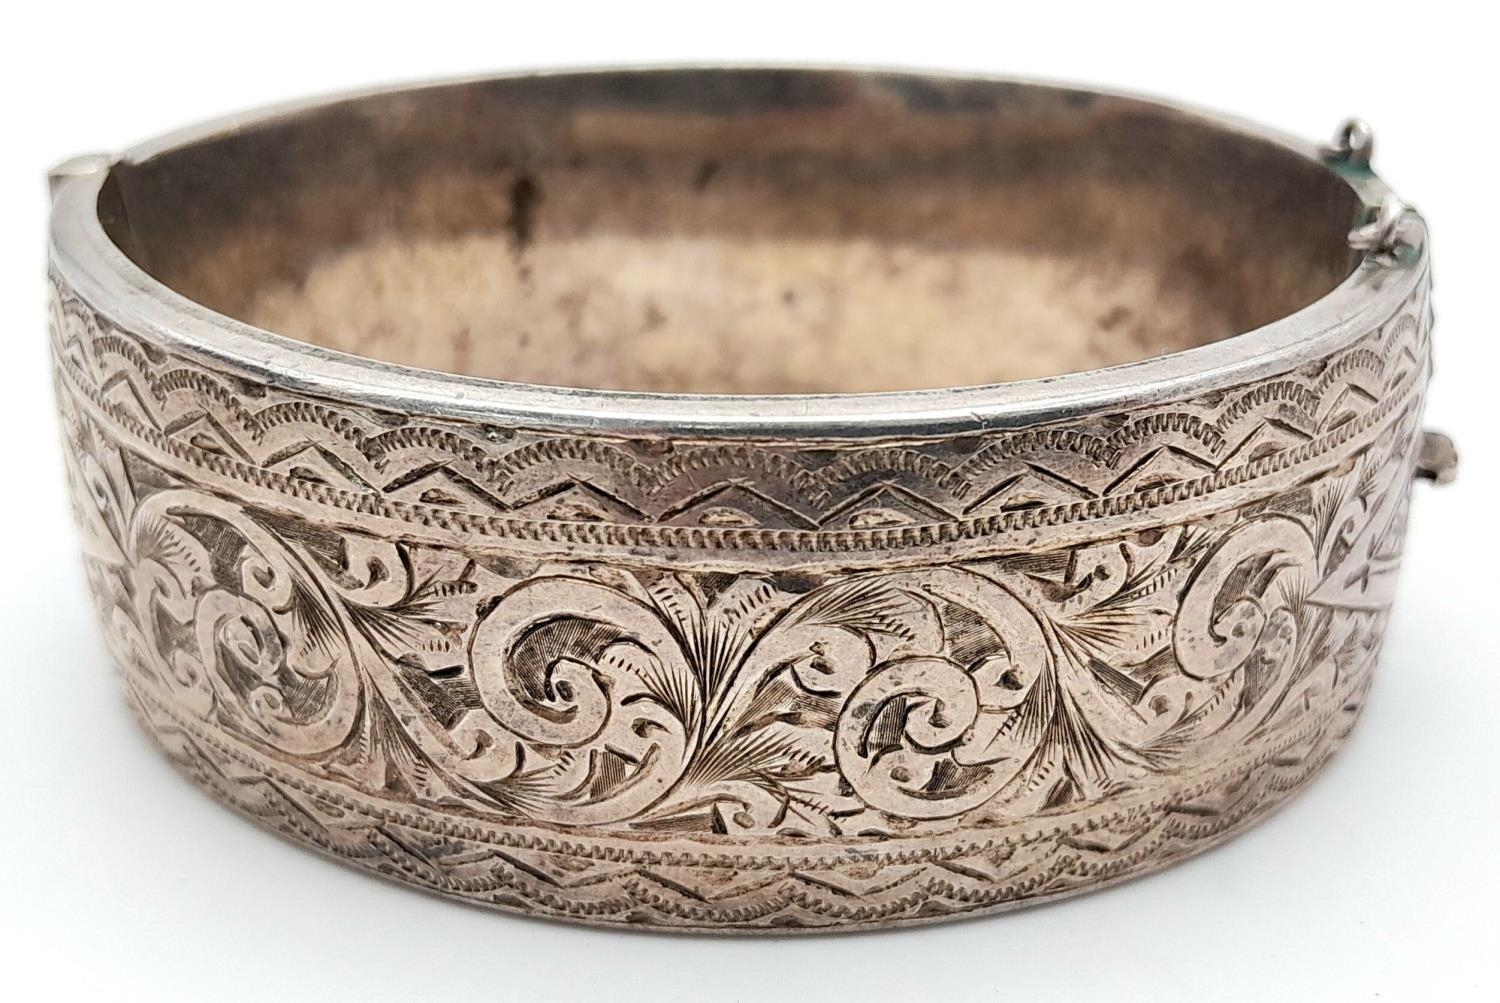 A Silver Victorian Engraved Bangle. 6.3cm diameter, 3cm band width, 43.69g weight.